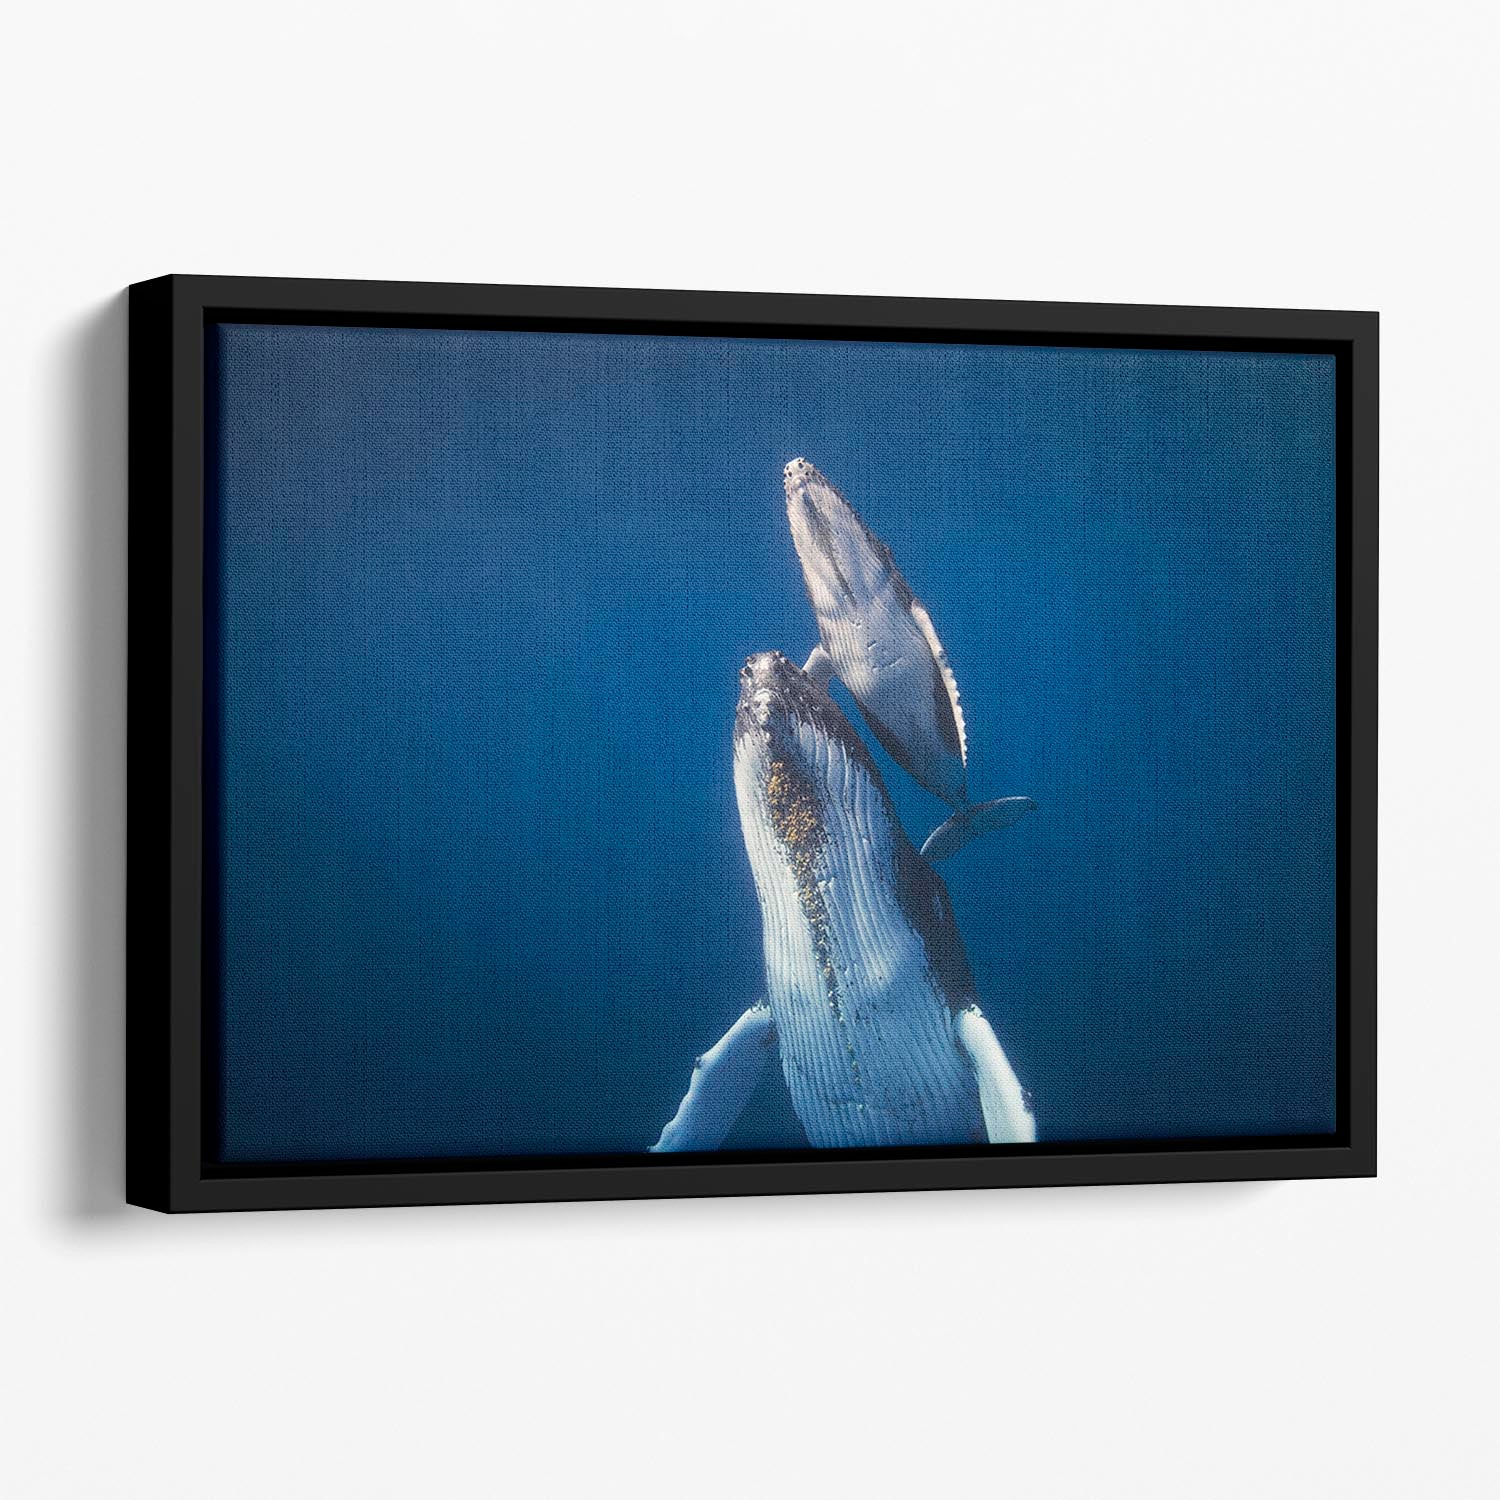 Come Back To The Surface Floating Framed Canvas - Canvas Art Rocks - 1